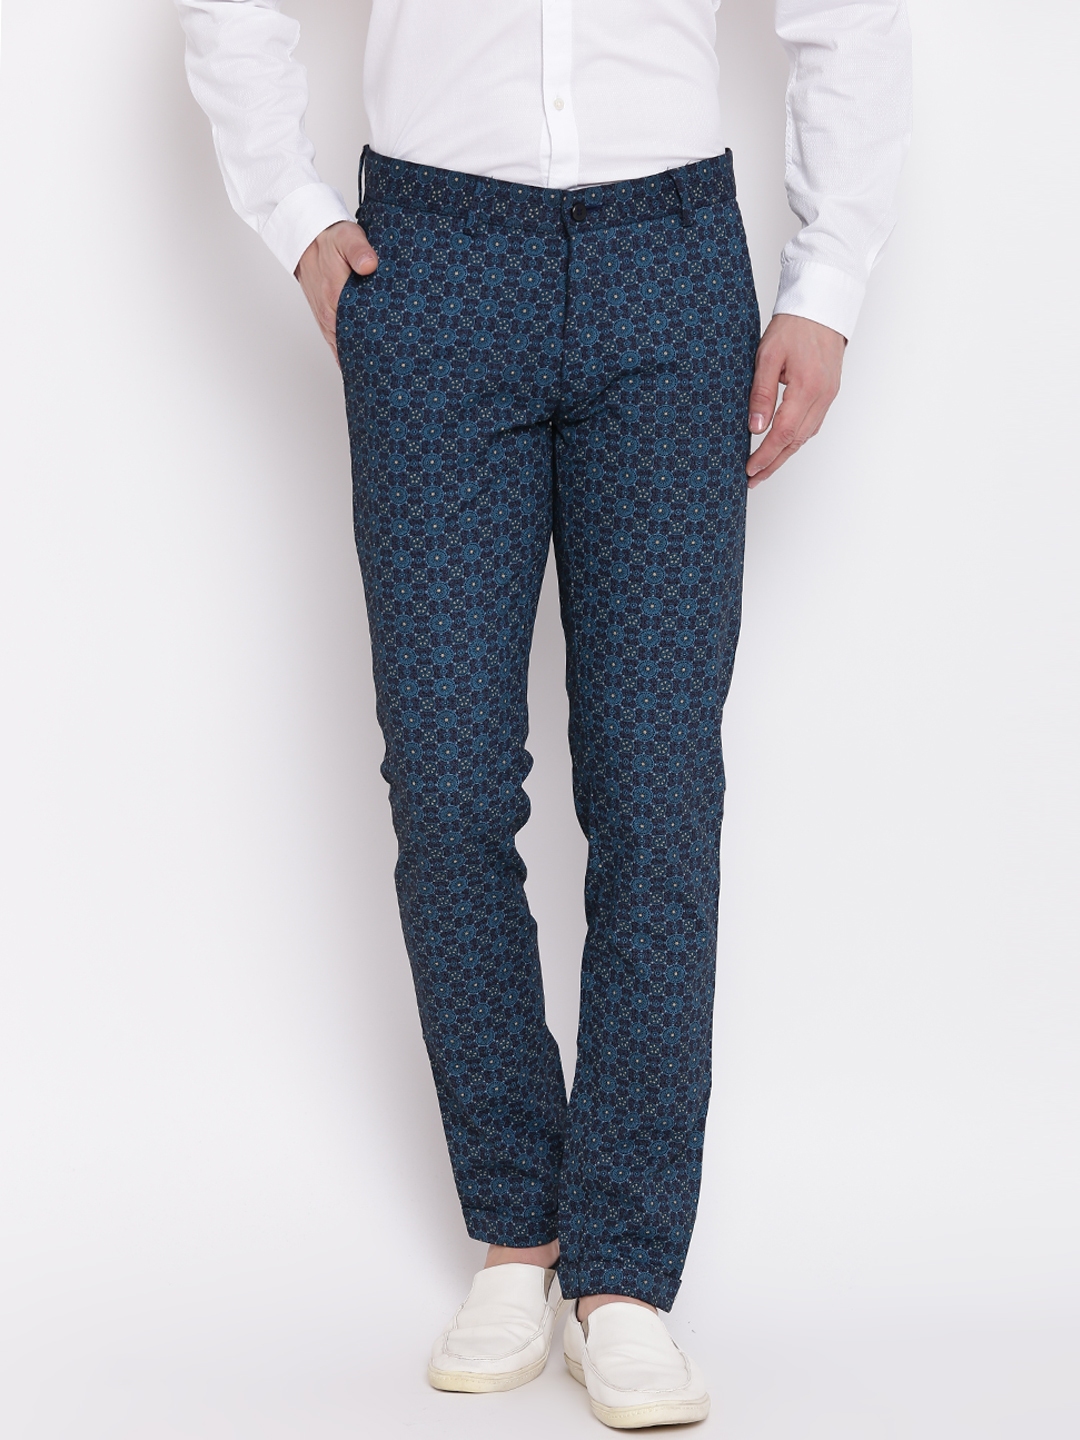 Shop Plaid Print Pants for Men from latest collection at Forever 21  483762